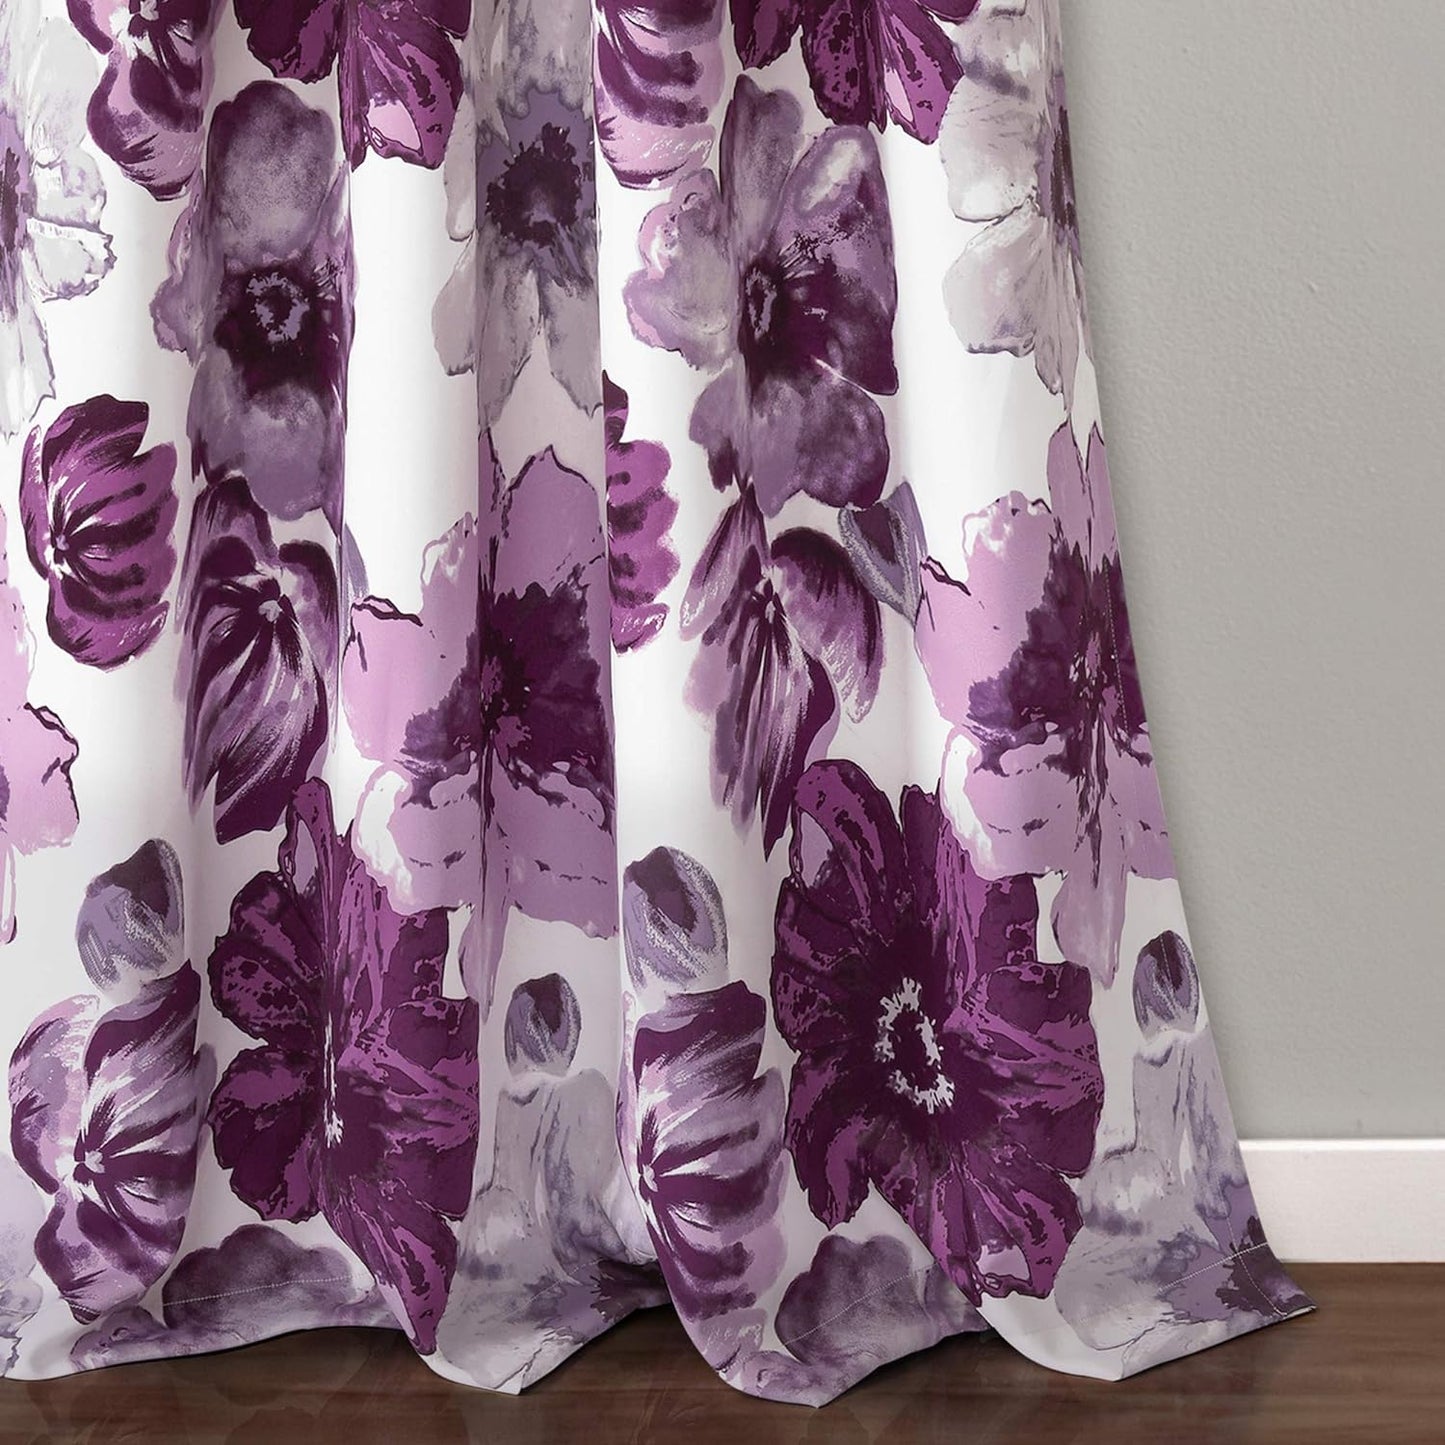 Leah Light Filtering Window Curtain Panel Pair Floral Insulated Grommet, 52"W X 95"L, Purple and Gray